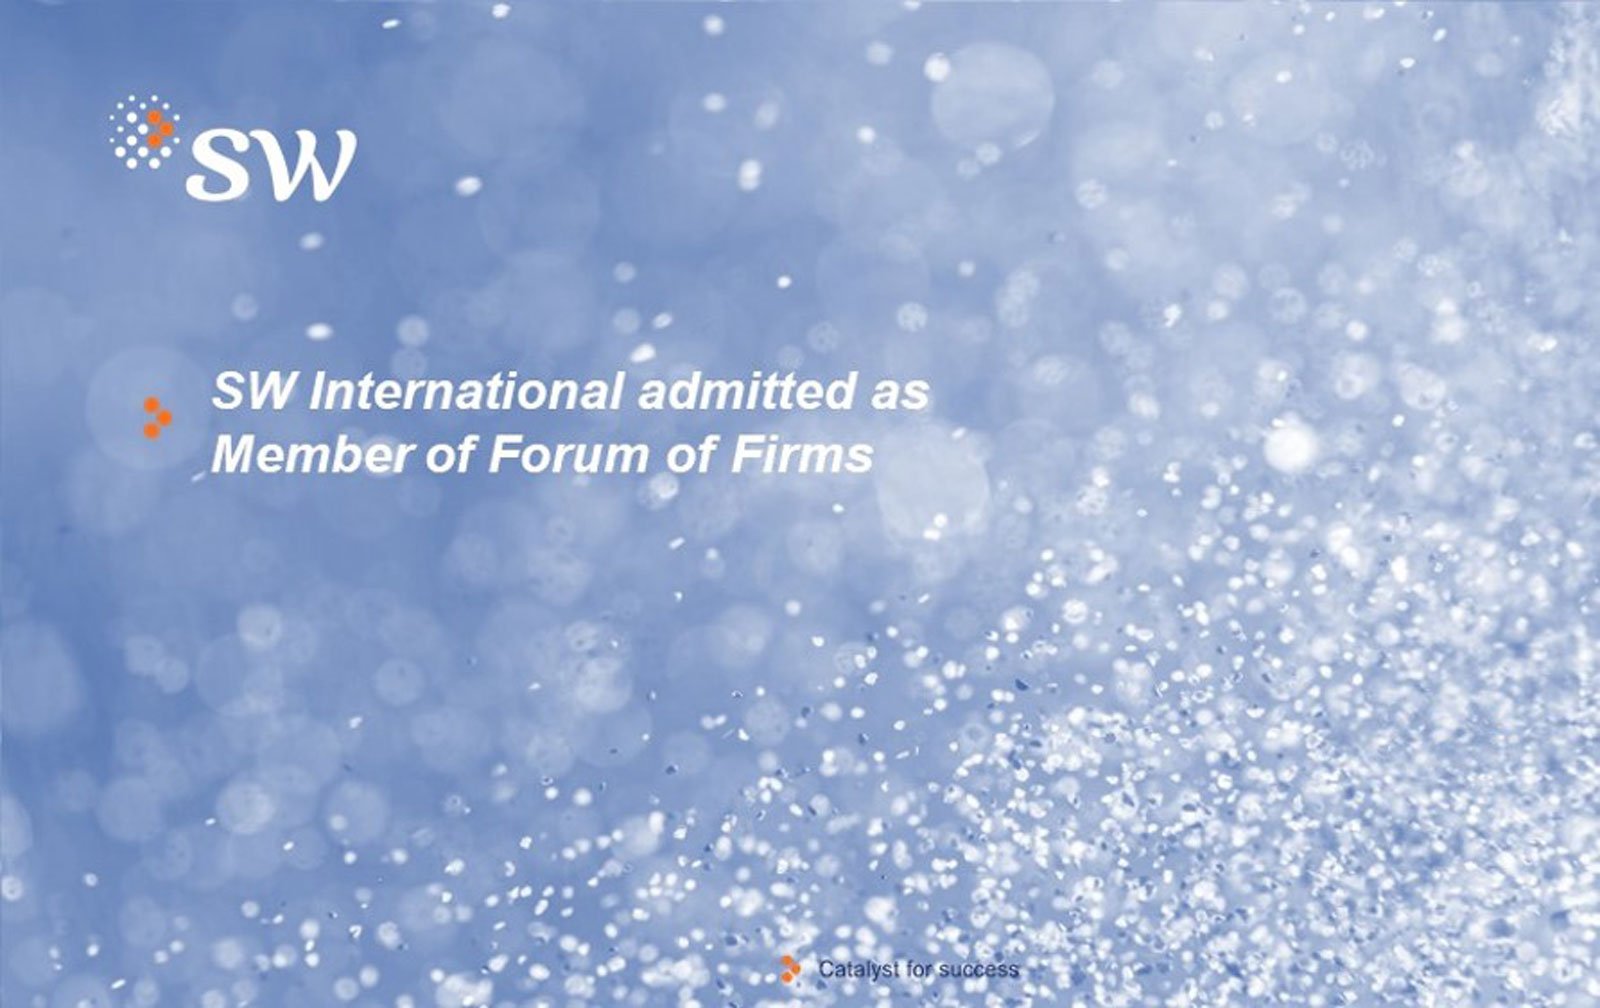 SW International admitted as a Member of the Forum of Firms